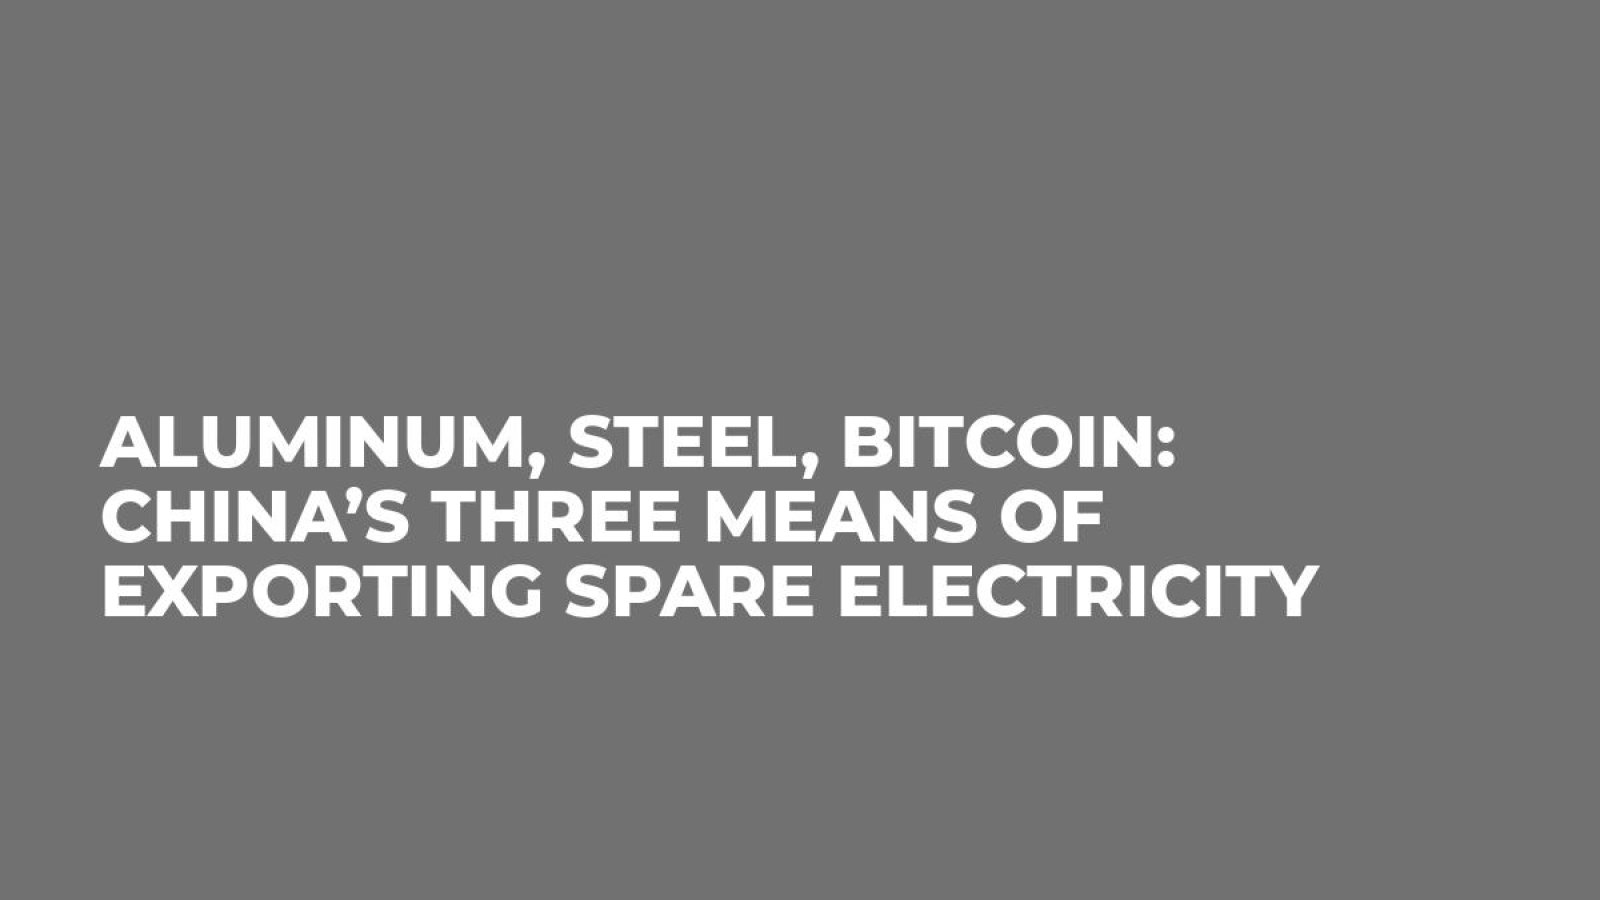 Aluminum, Steel, Bitcoin: China’s Three Means of Exporting Spare Electricity